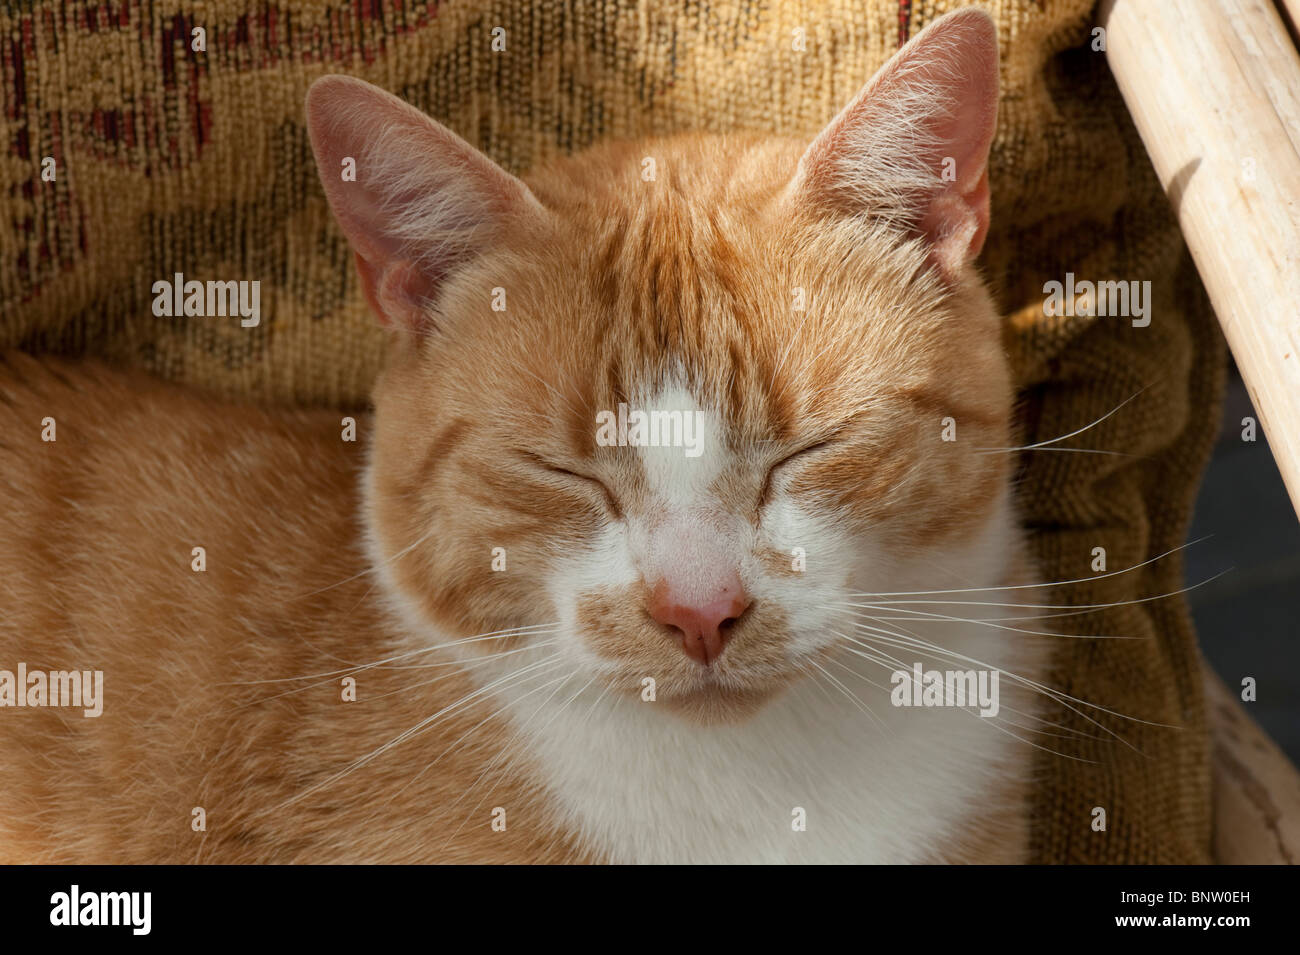 A ginger cat with eyes closed but alert with ears upright Stock Photo